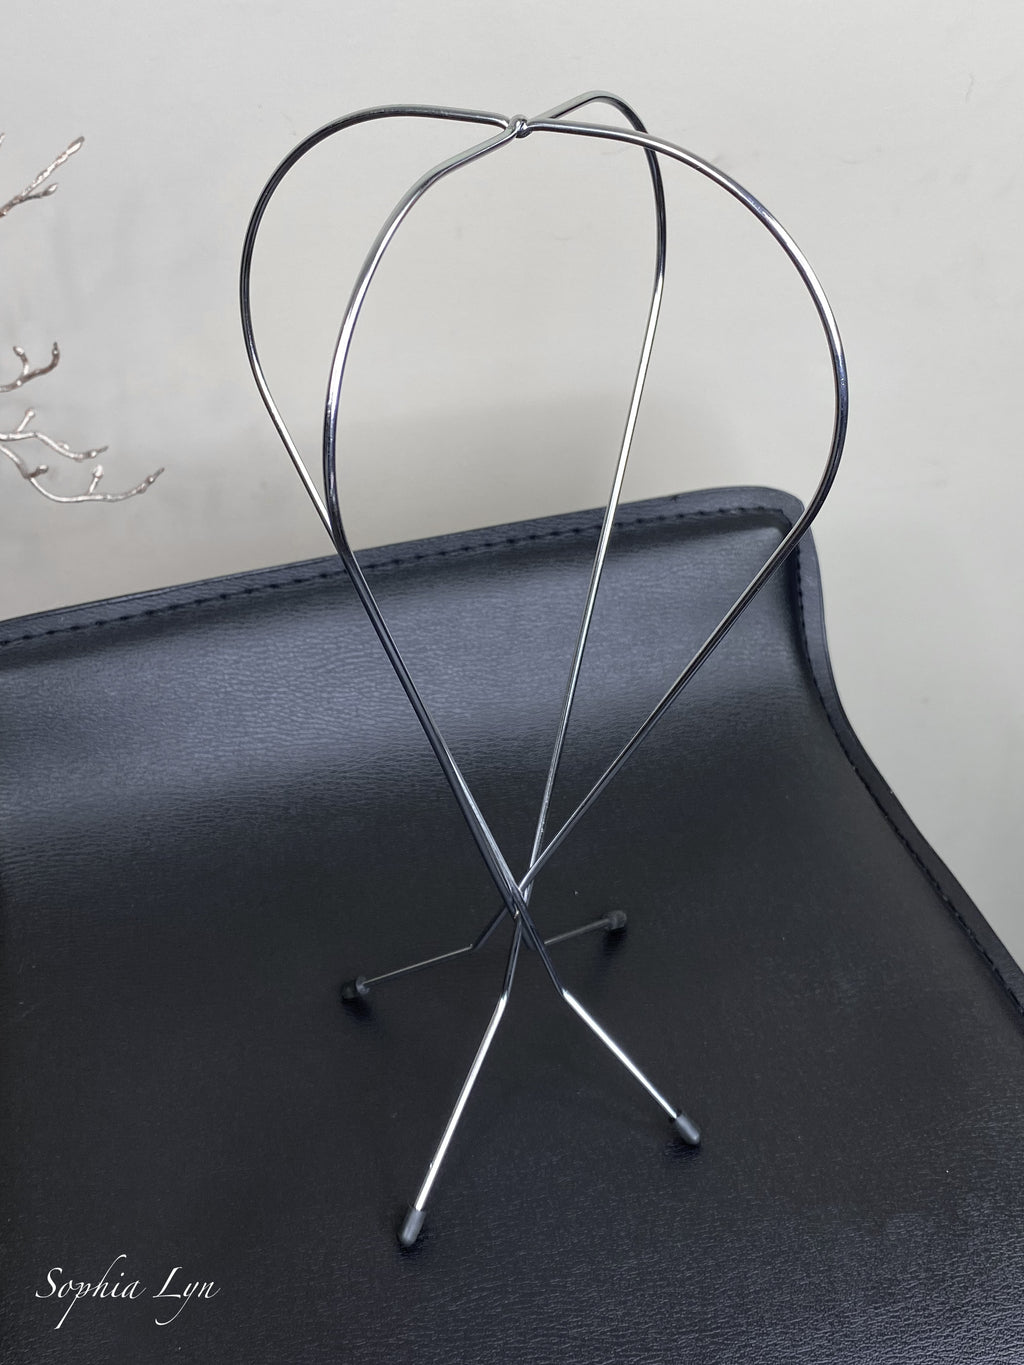 Collapsible Wig Stand